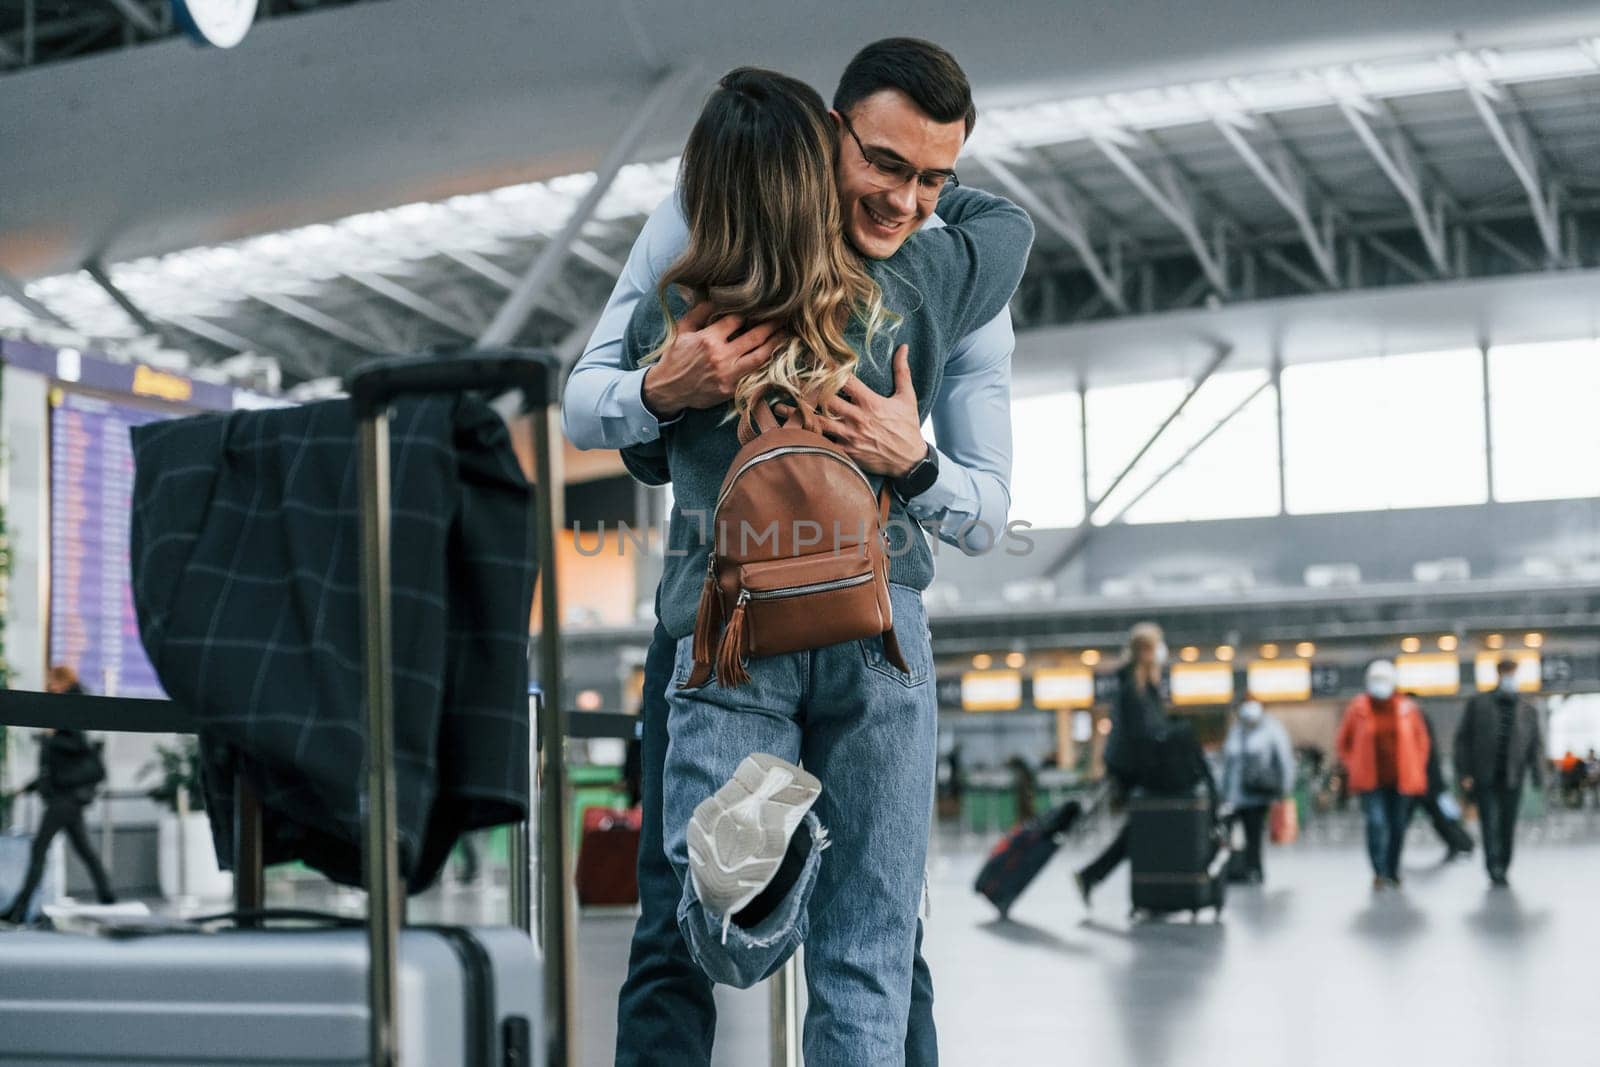 Embracing each other. Young couple is in the airport together by Standret